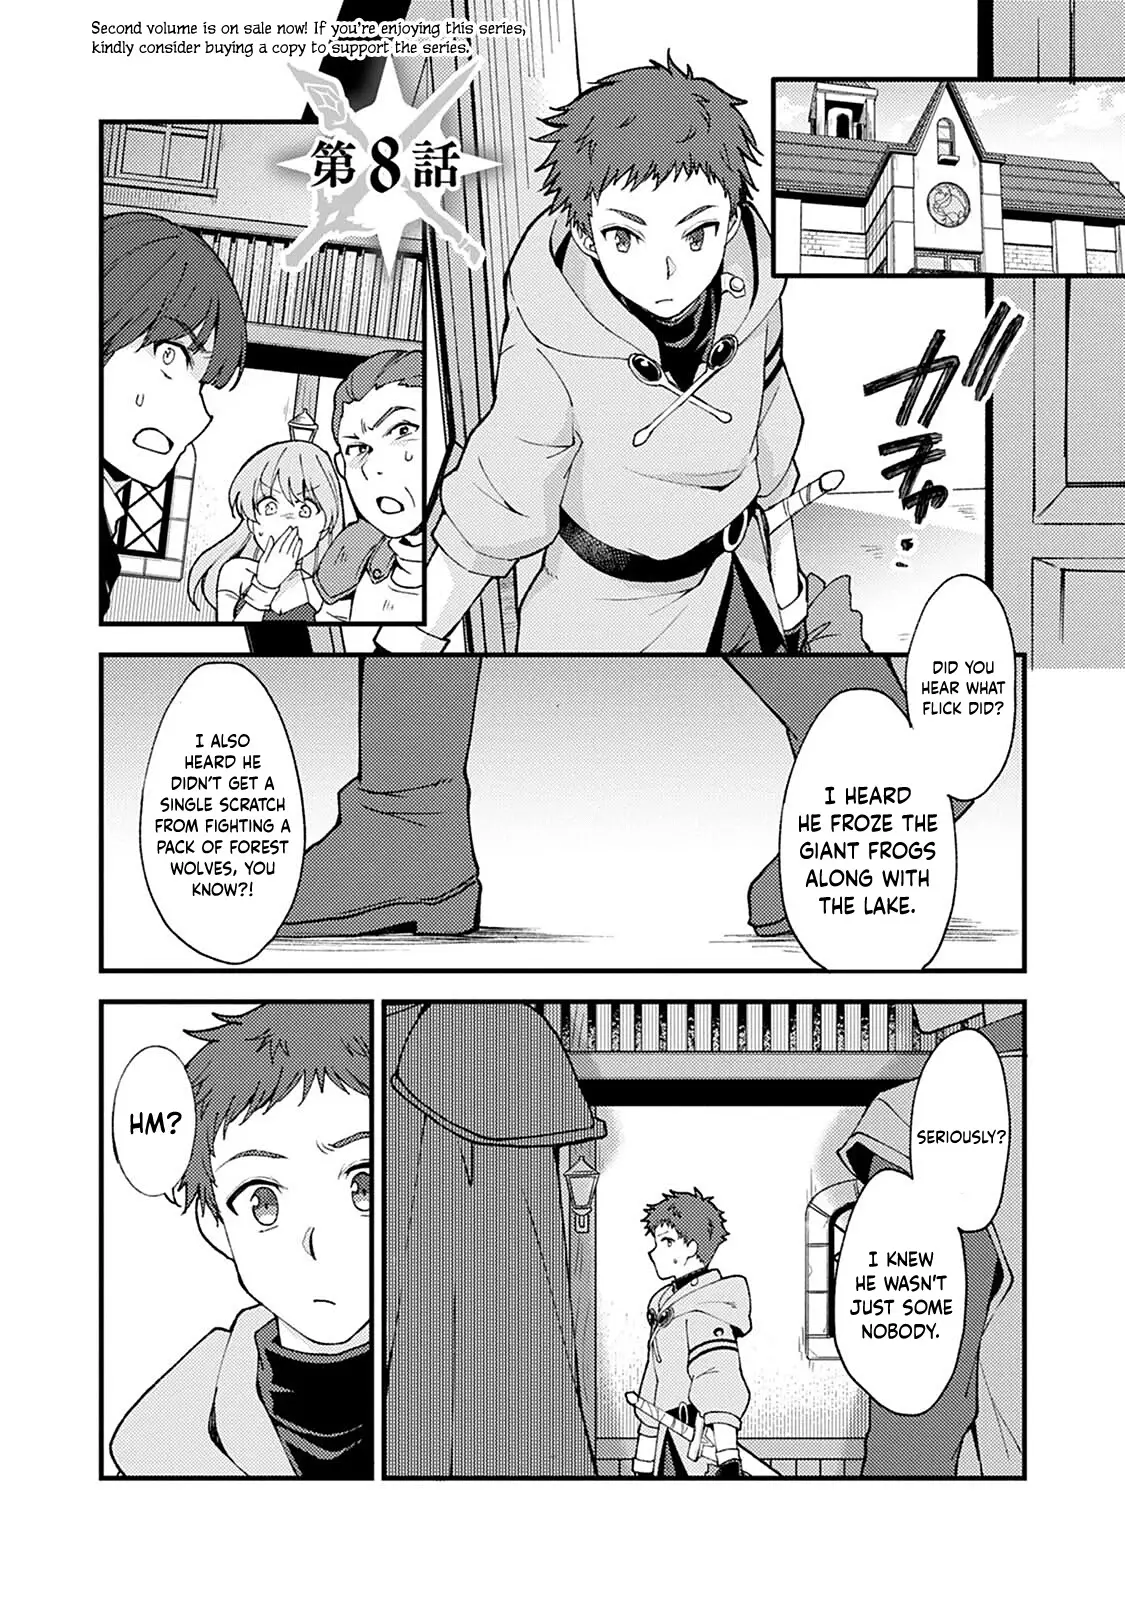 A Sword Master Childhood Friend Power Harassed Me Harshly, So I Broke Off Our Relationship And Make A Fresh Start At The Frontier As A Magic Swordsman. - 8 page 2